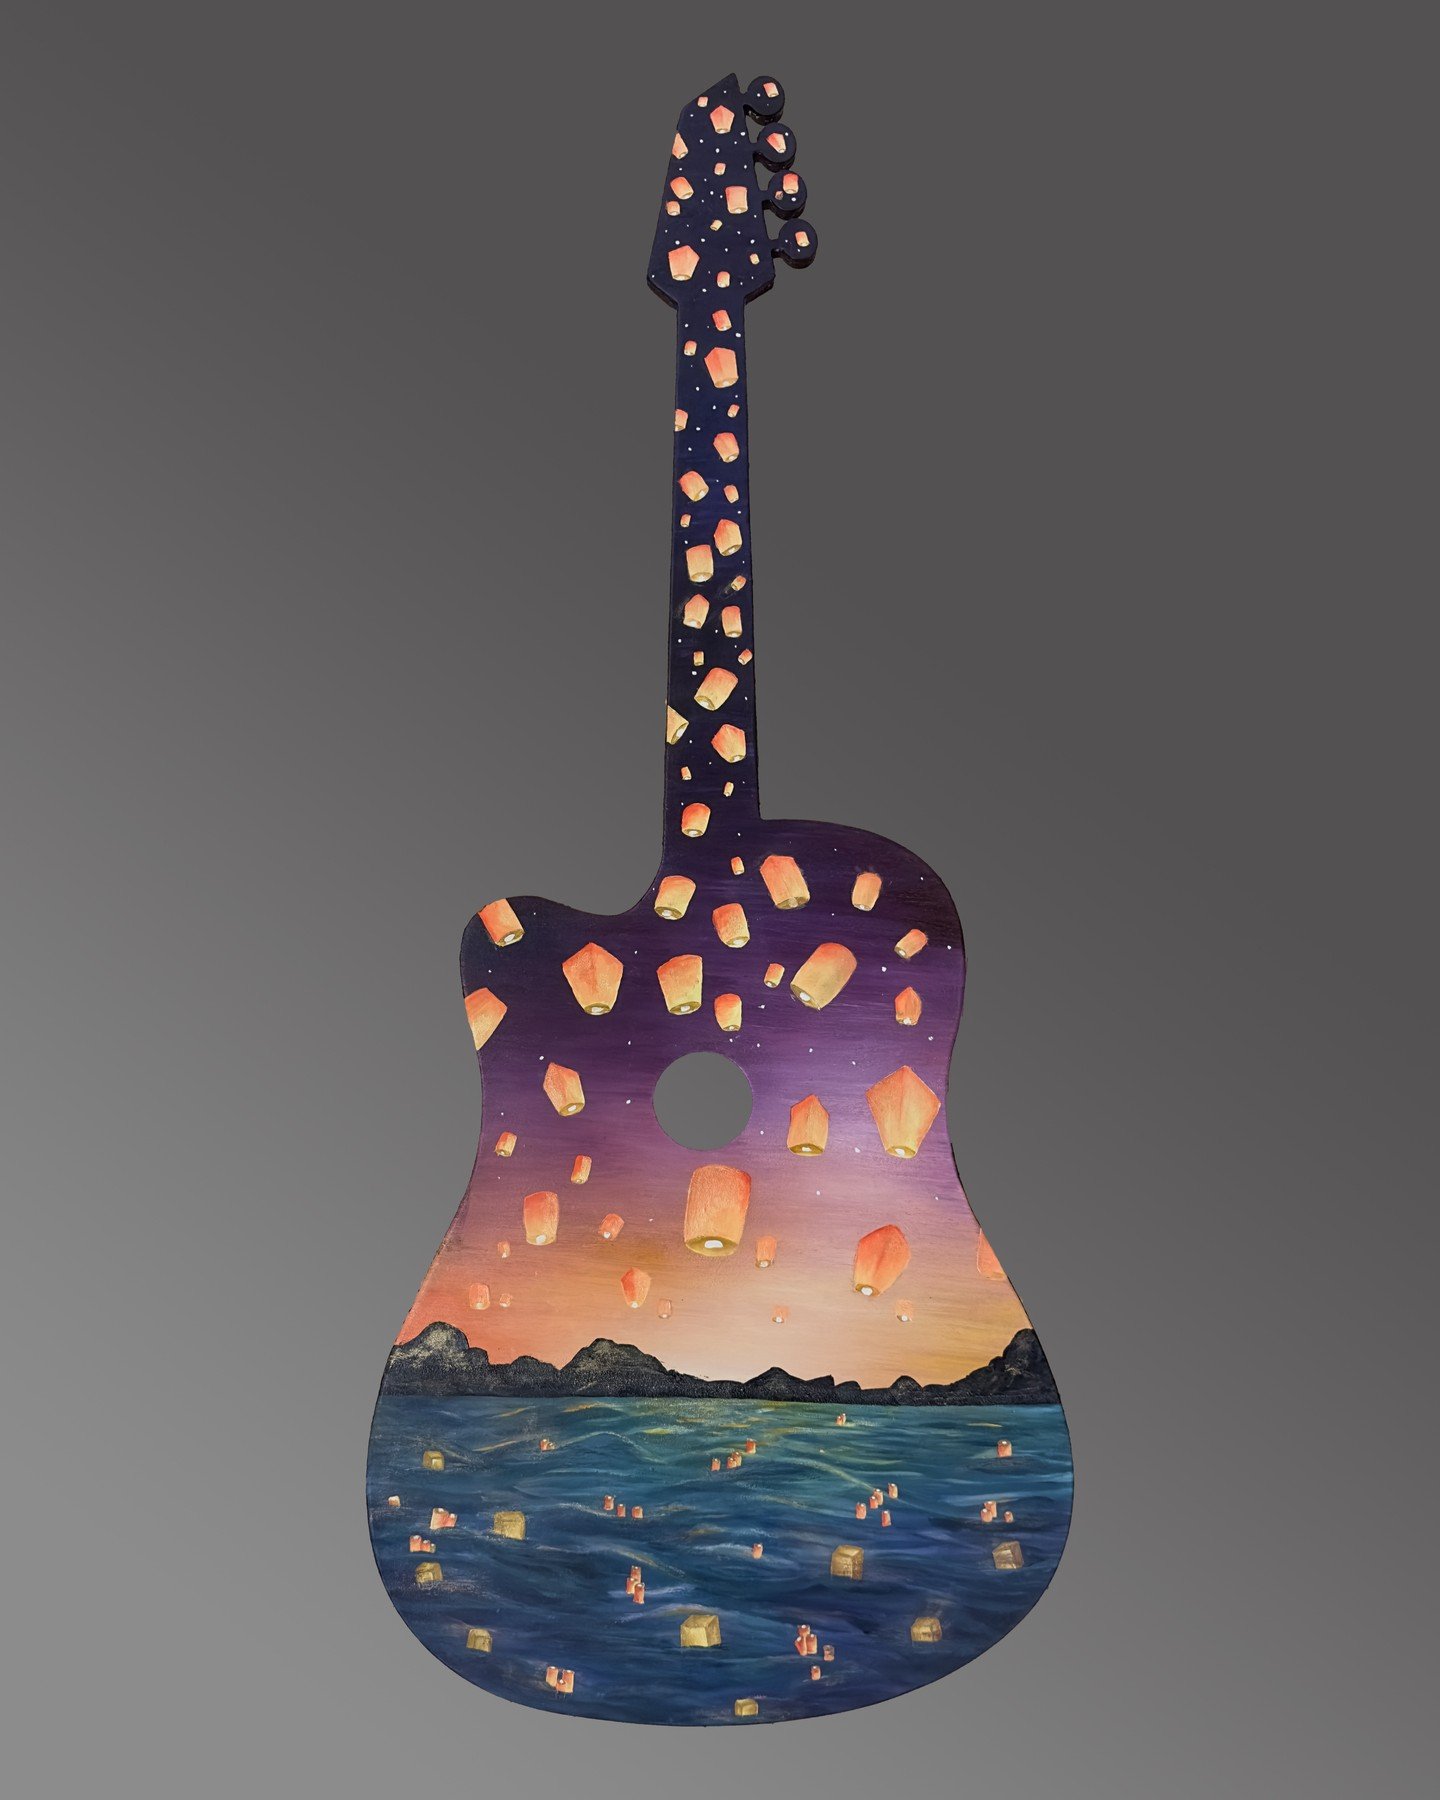 These are the completed guitar templates being submitted for auction happening at the EFN (Education Foundation of Niagara) In the Round fundraiser event.

INCREDIBLE creative problem solving and collaboration. Amazing!!
 
IMAGE 1- 
&quot;Luminous Pa